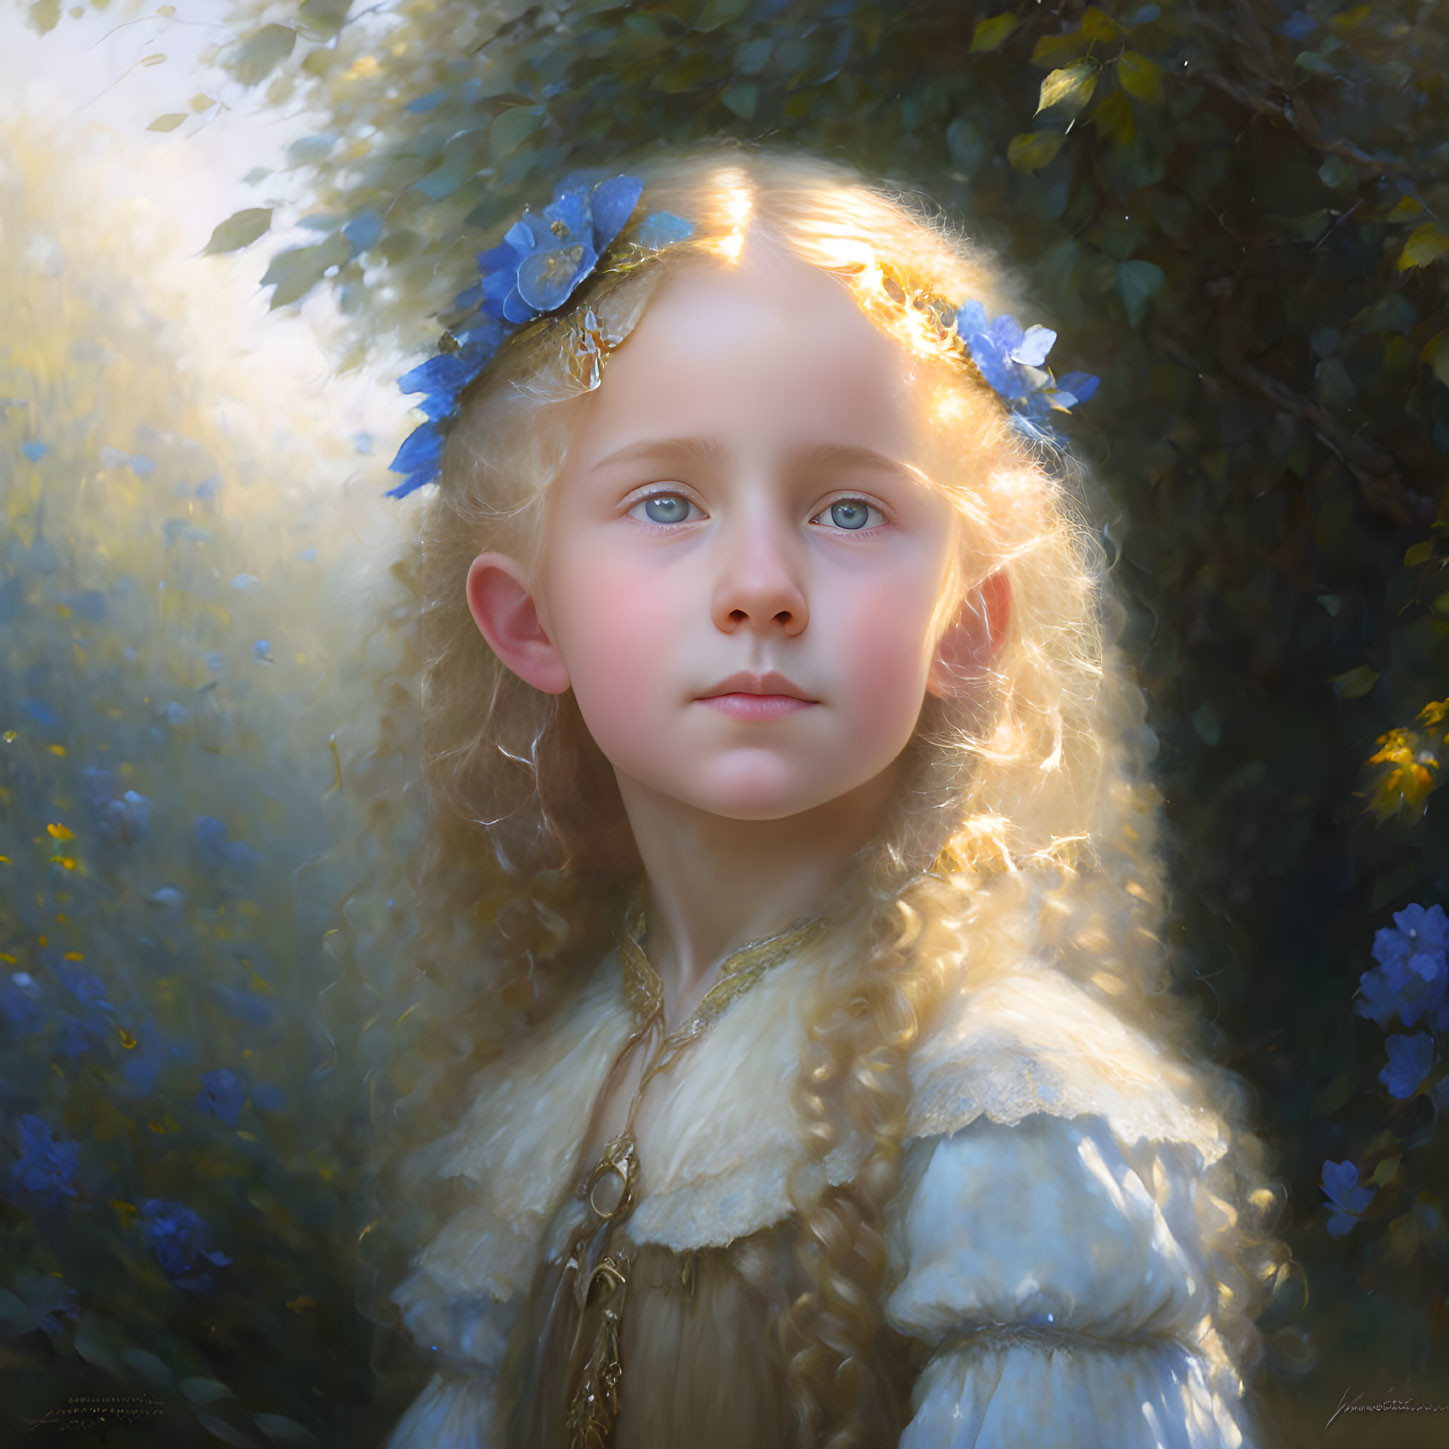 Young girl with blue eyes and blond hair in vintage cream outfit, surrounded by soft light and natural backdrop